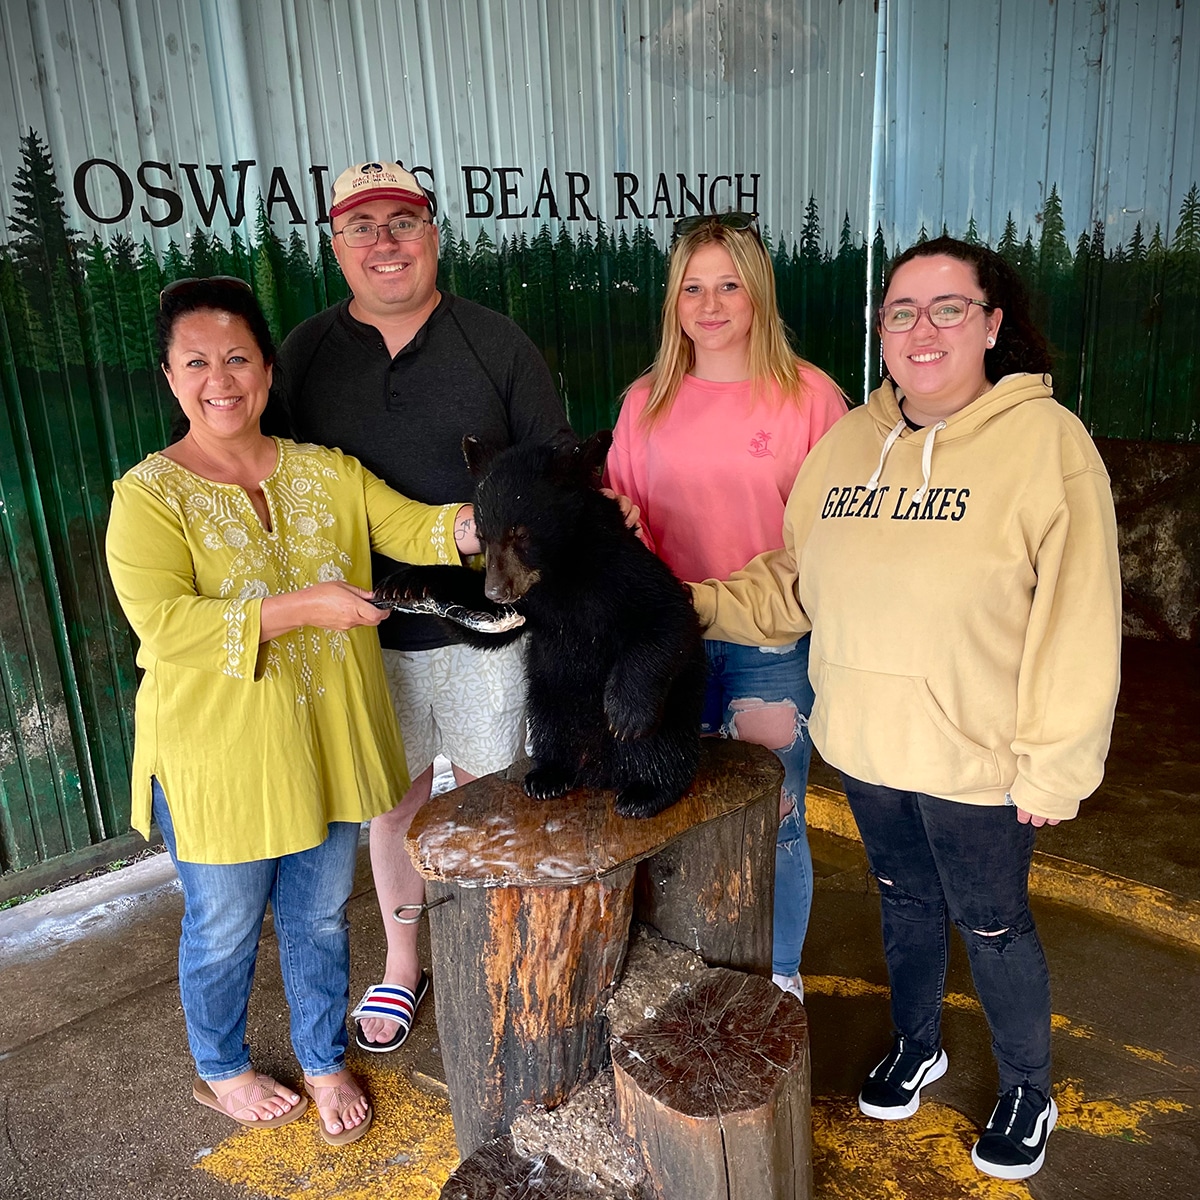 Steve and I with our niece and daughter feeding the a baby bear at Oswald's Bear Ranch in Michigan's UP.